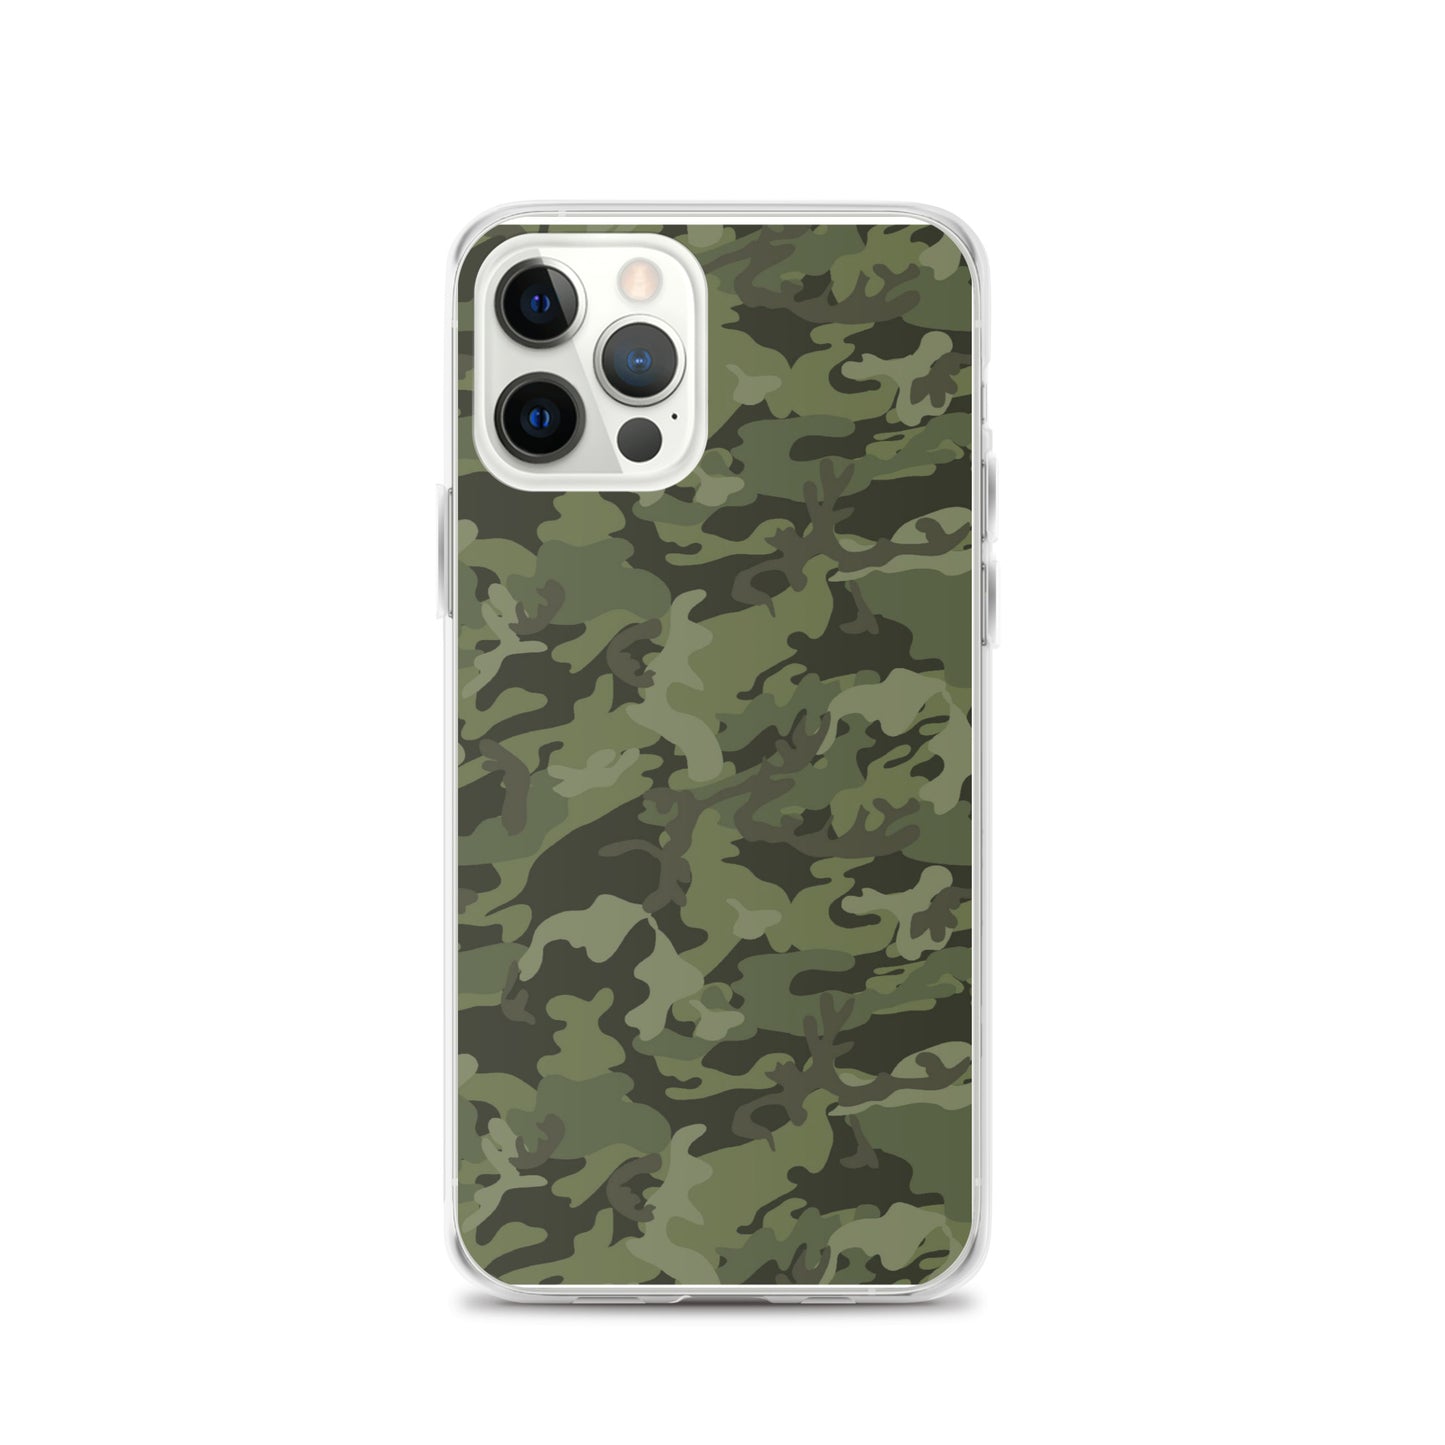 Sniper Takeout - Clear Case for iPhone